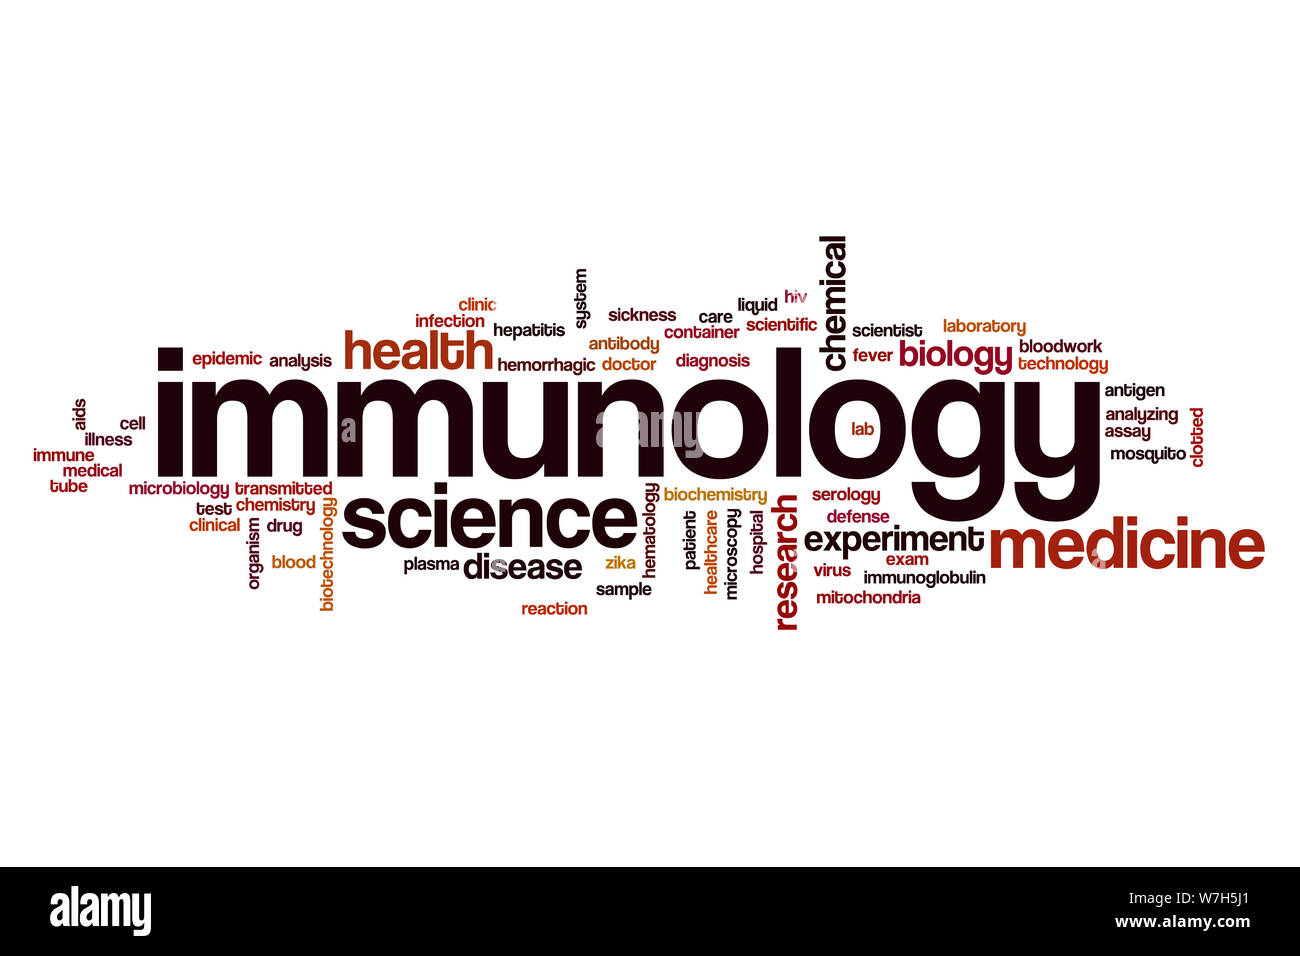 Immunology word cloud concept Stock Photo